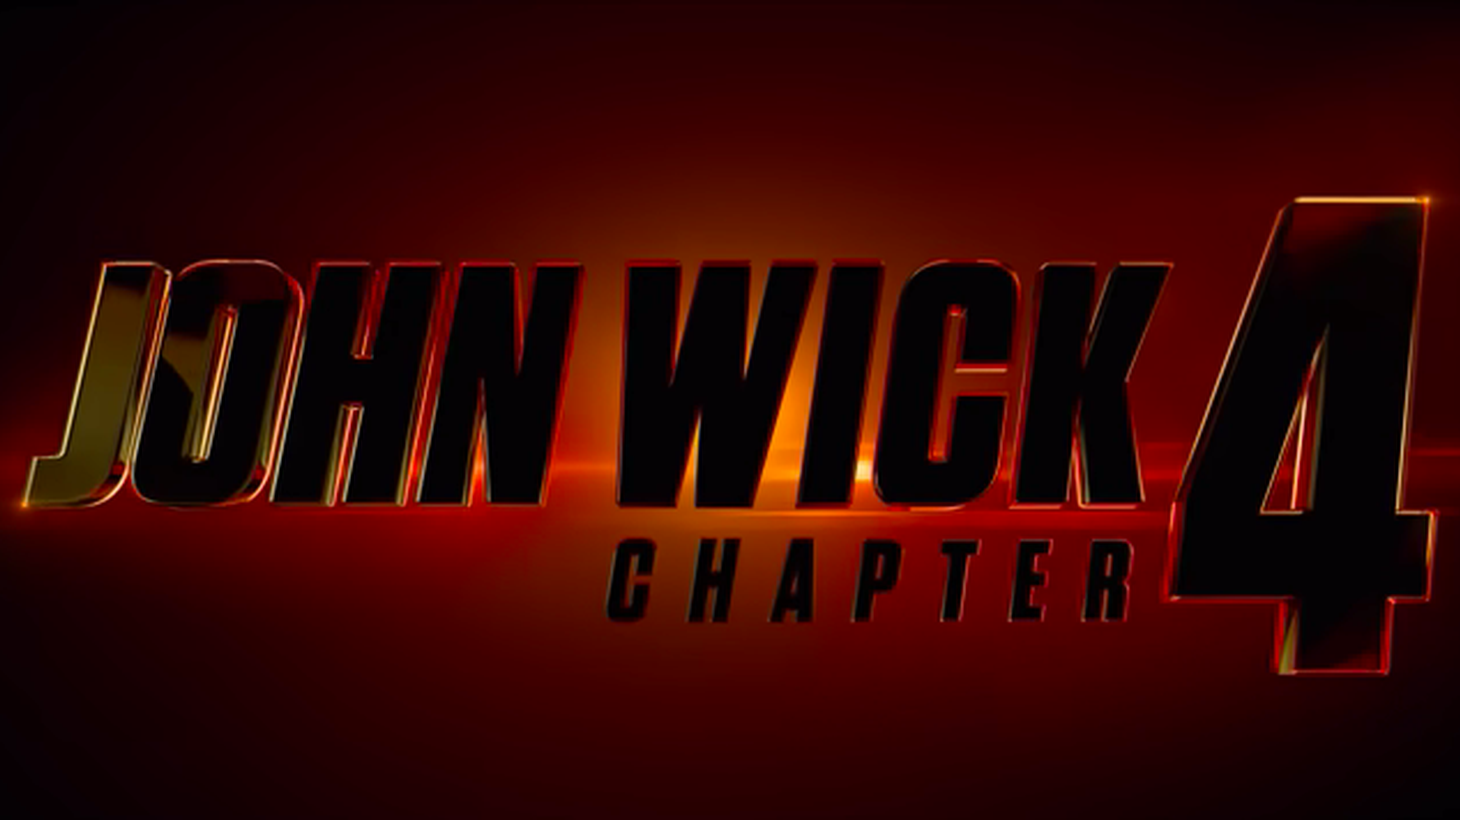 In “John Wick: Chapter 4,” Keanu Reeves returns as John Wick, who is trying to regain his freedom.